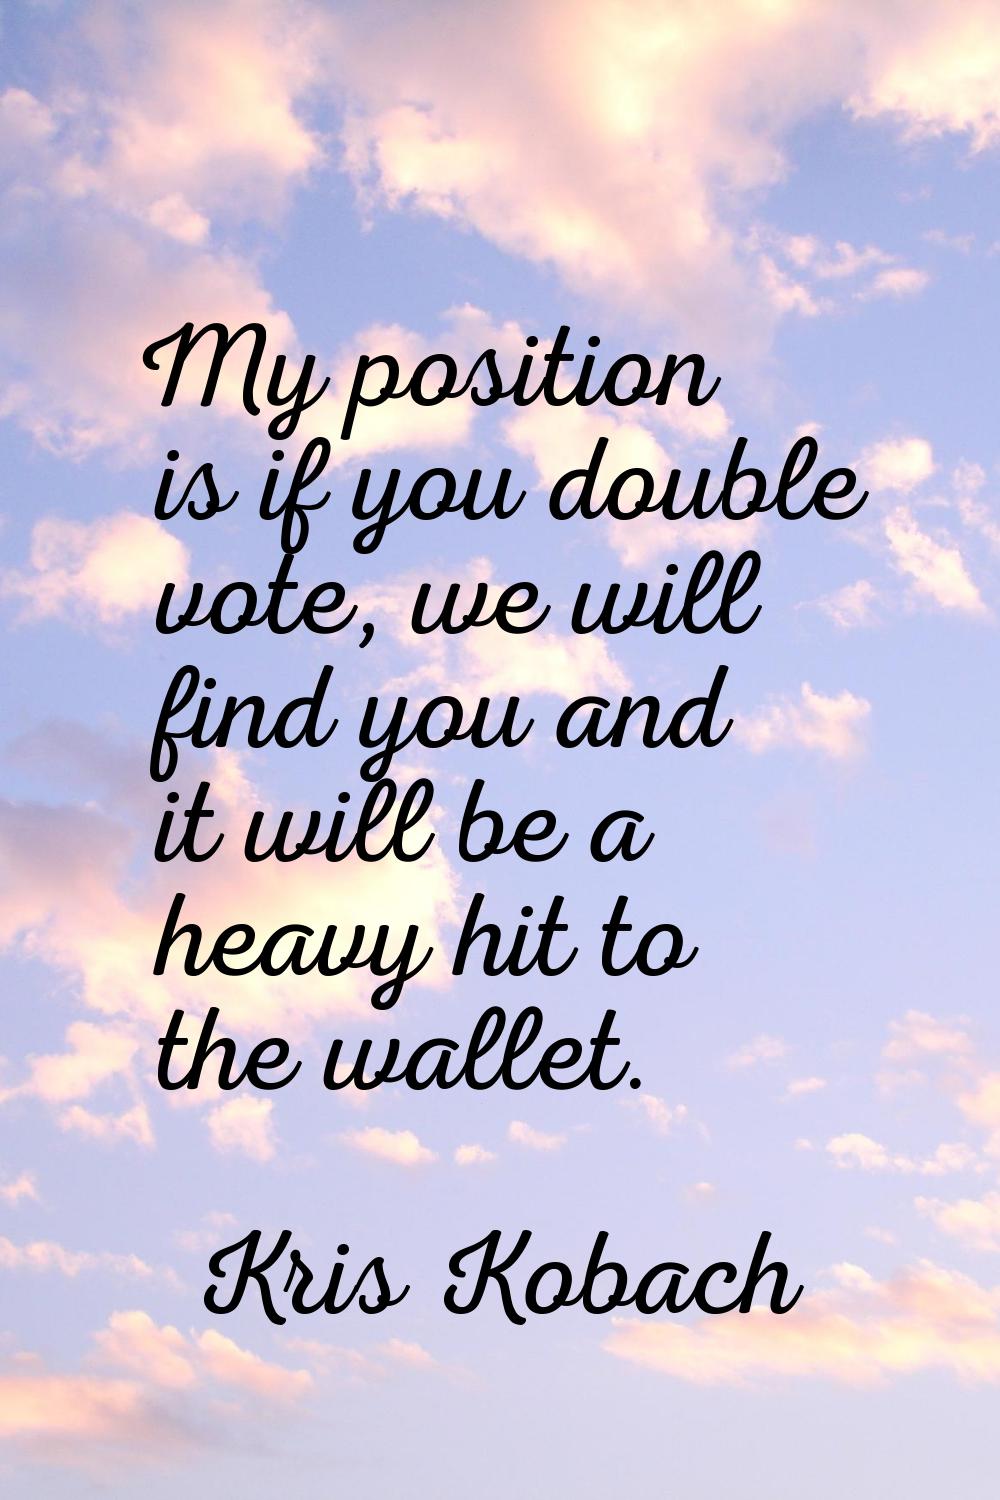 My position is if you double vote, we will find you and it will be a heavy hit to the wallet.